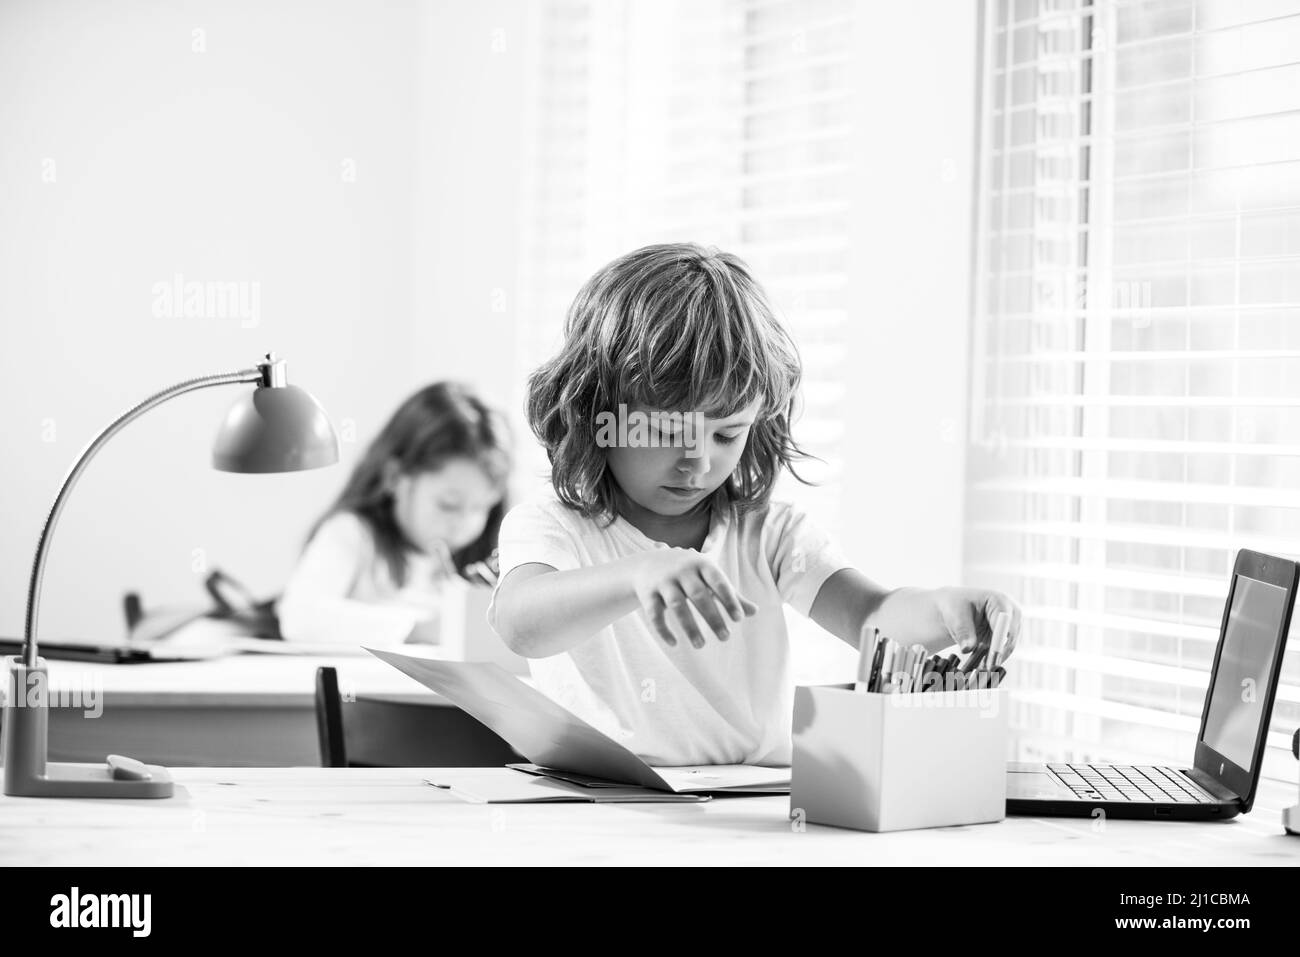 School boy sitting at the table, writing homework or preparing for the exam. Child ready to study. Little studen learning. Stock Photo